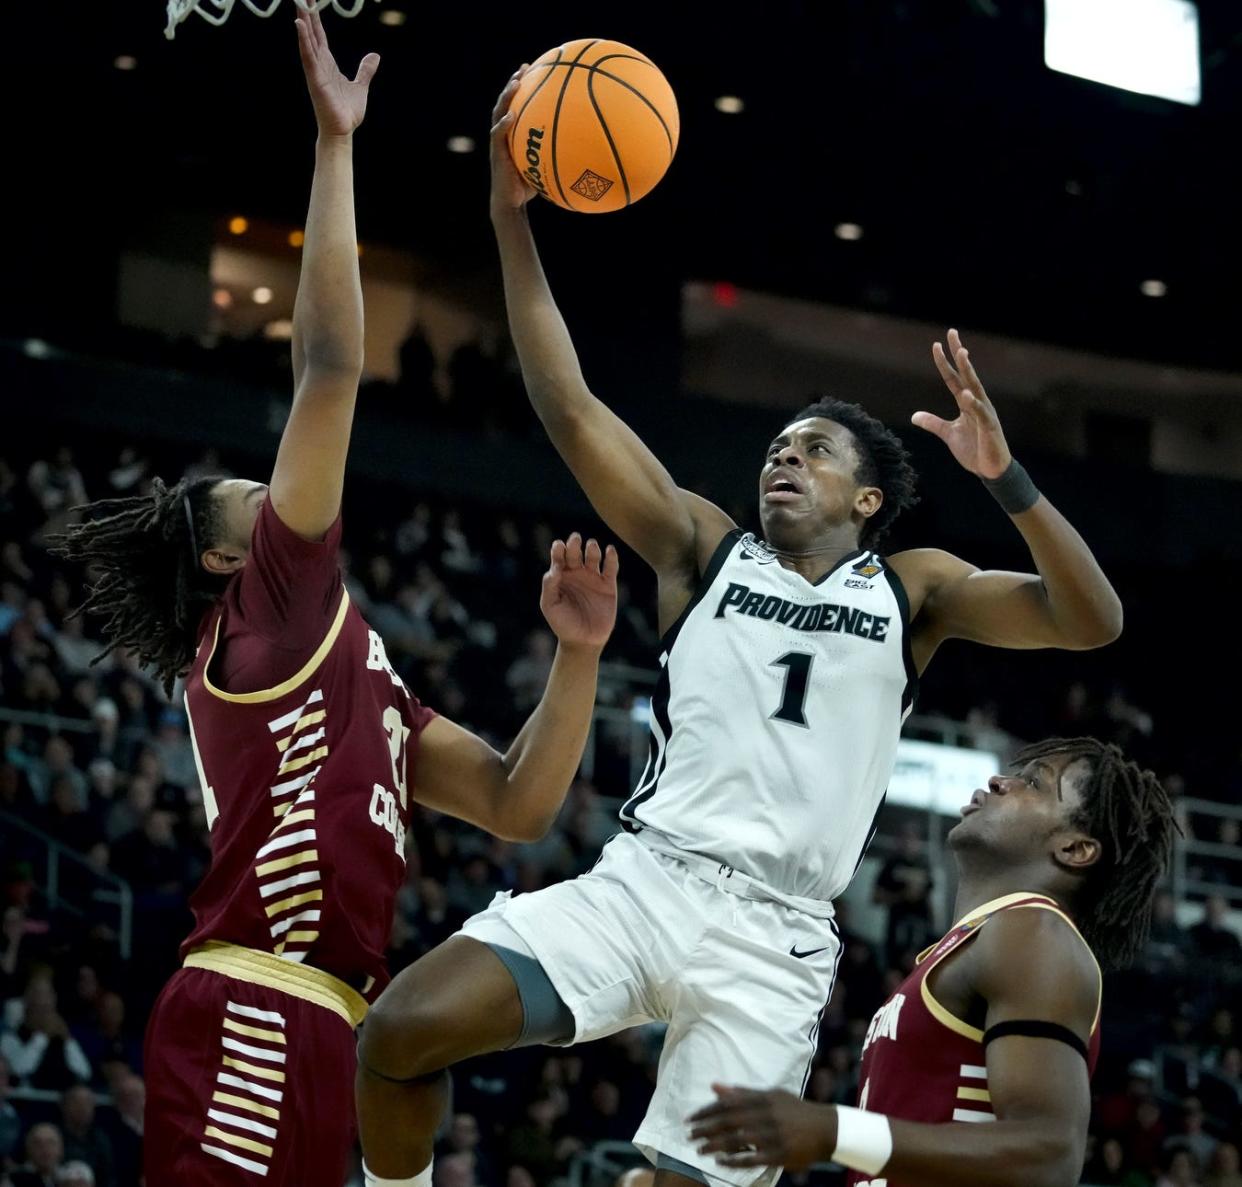 Guard Jayden Pierre will likely play a larger role for Providence next season.